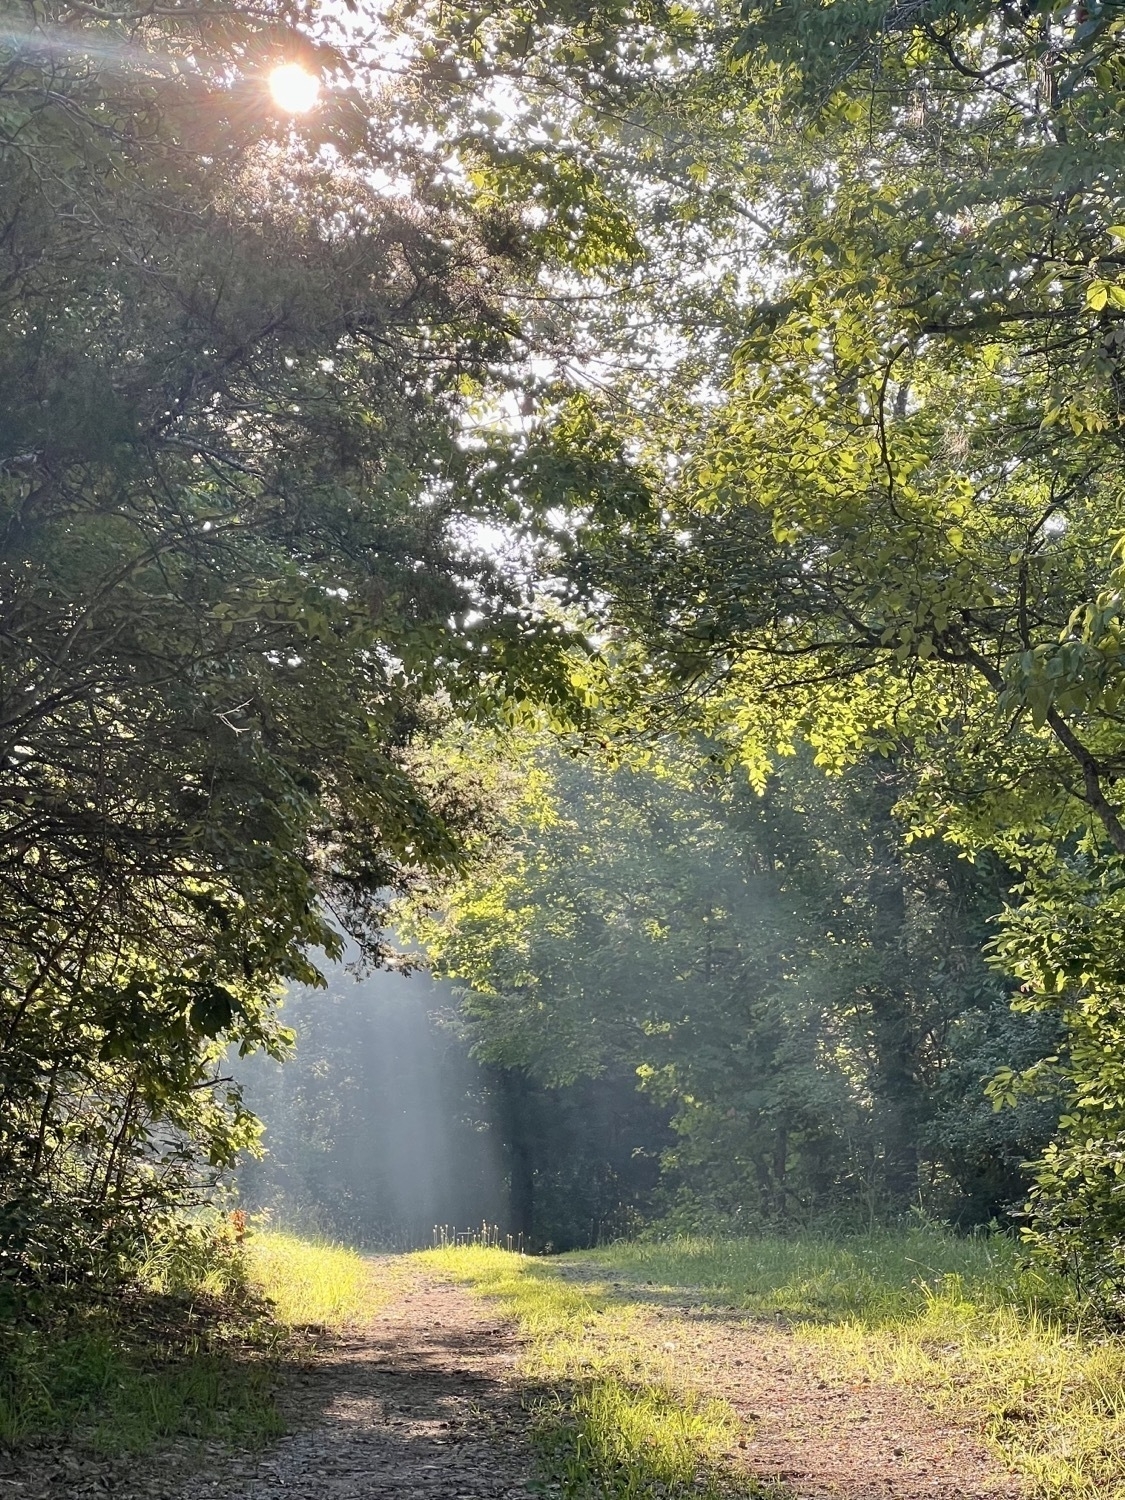 Morning sunlight streams through the branches of trees falling on a gravel road in the near distance. The rays of light contrast against a dark green background of trees that form most of the background of the image.